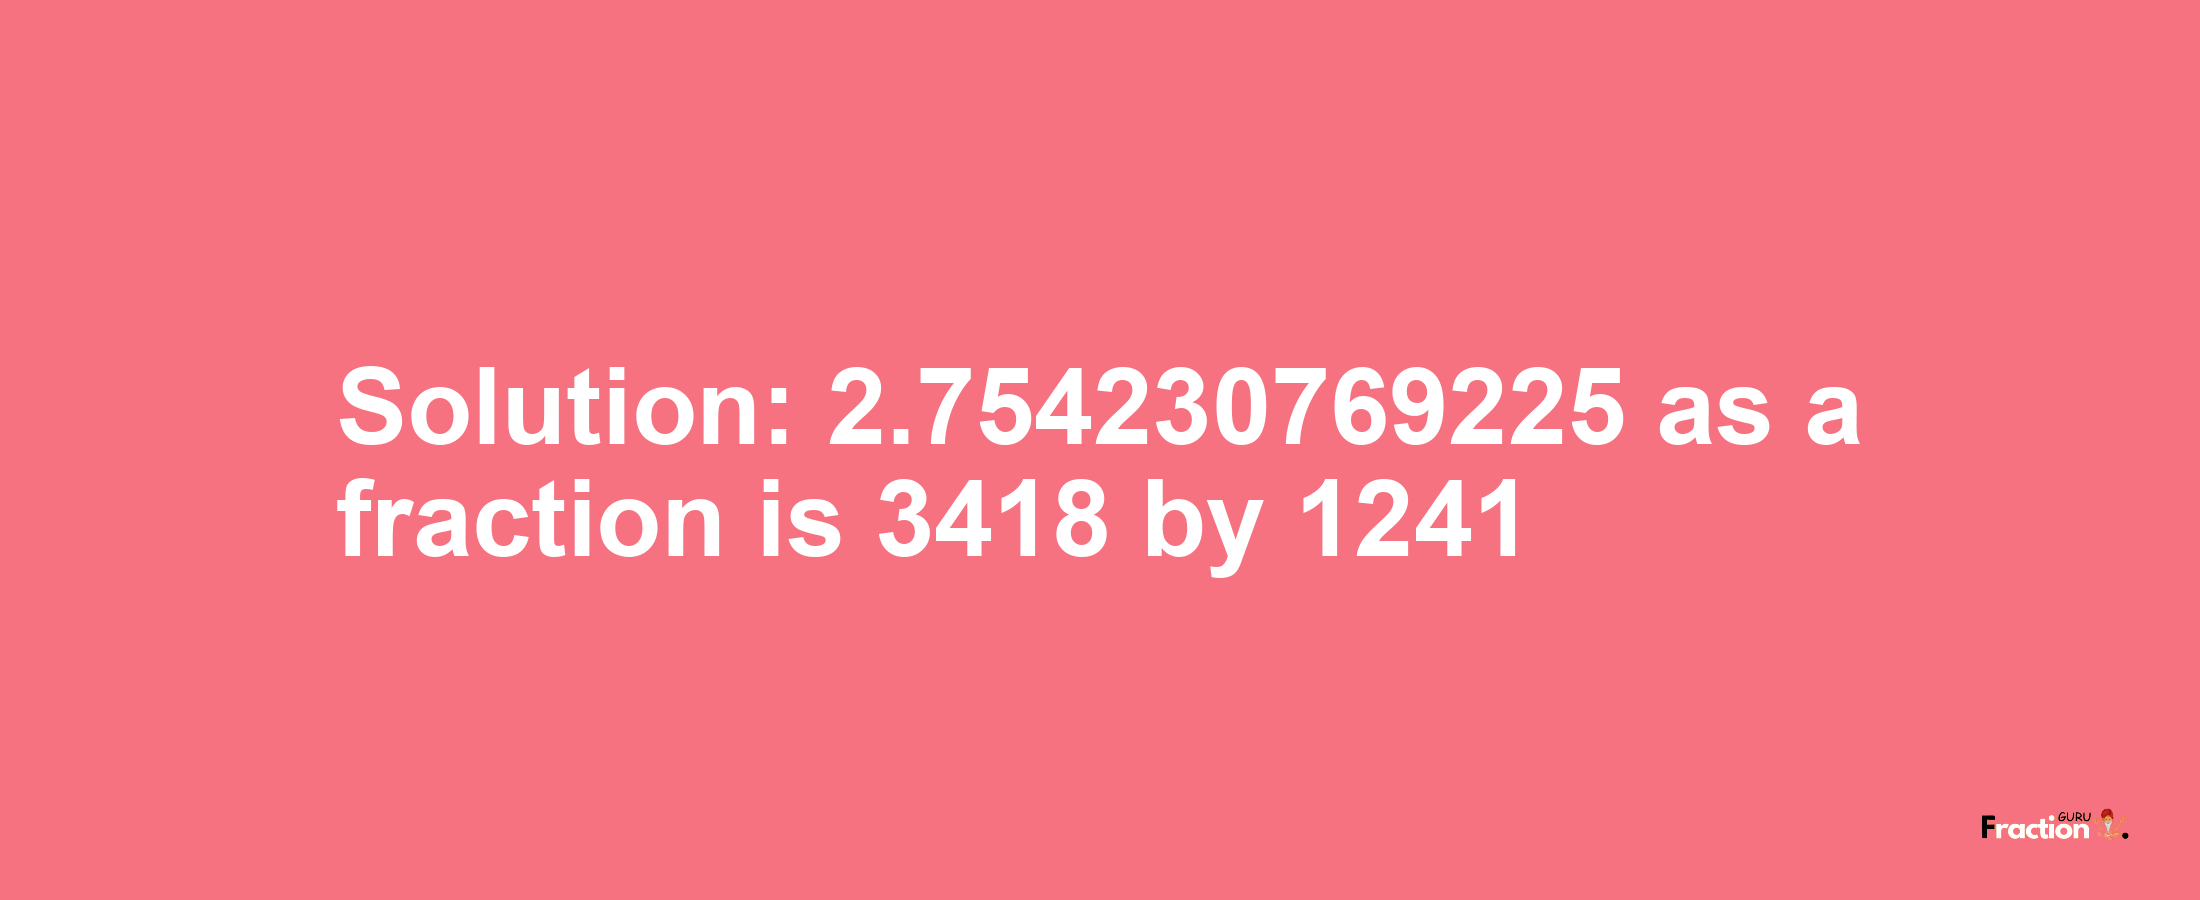 Solution:2.754230769225 as a fraction is 3418/1241